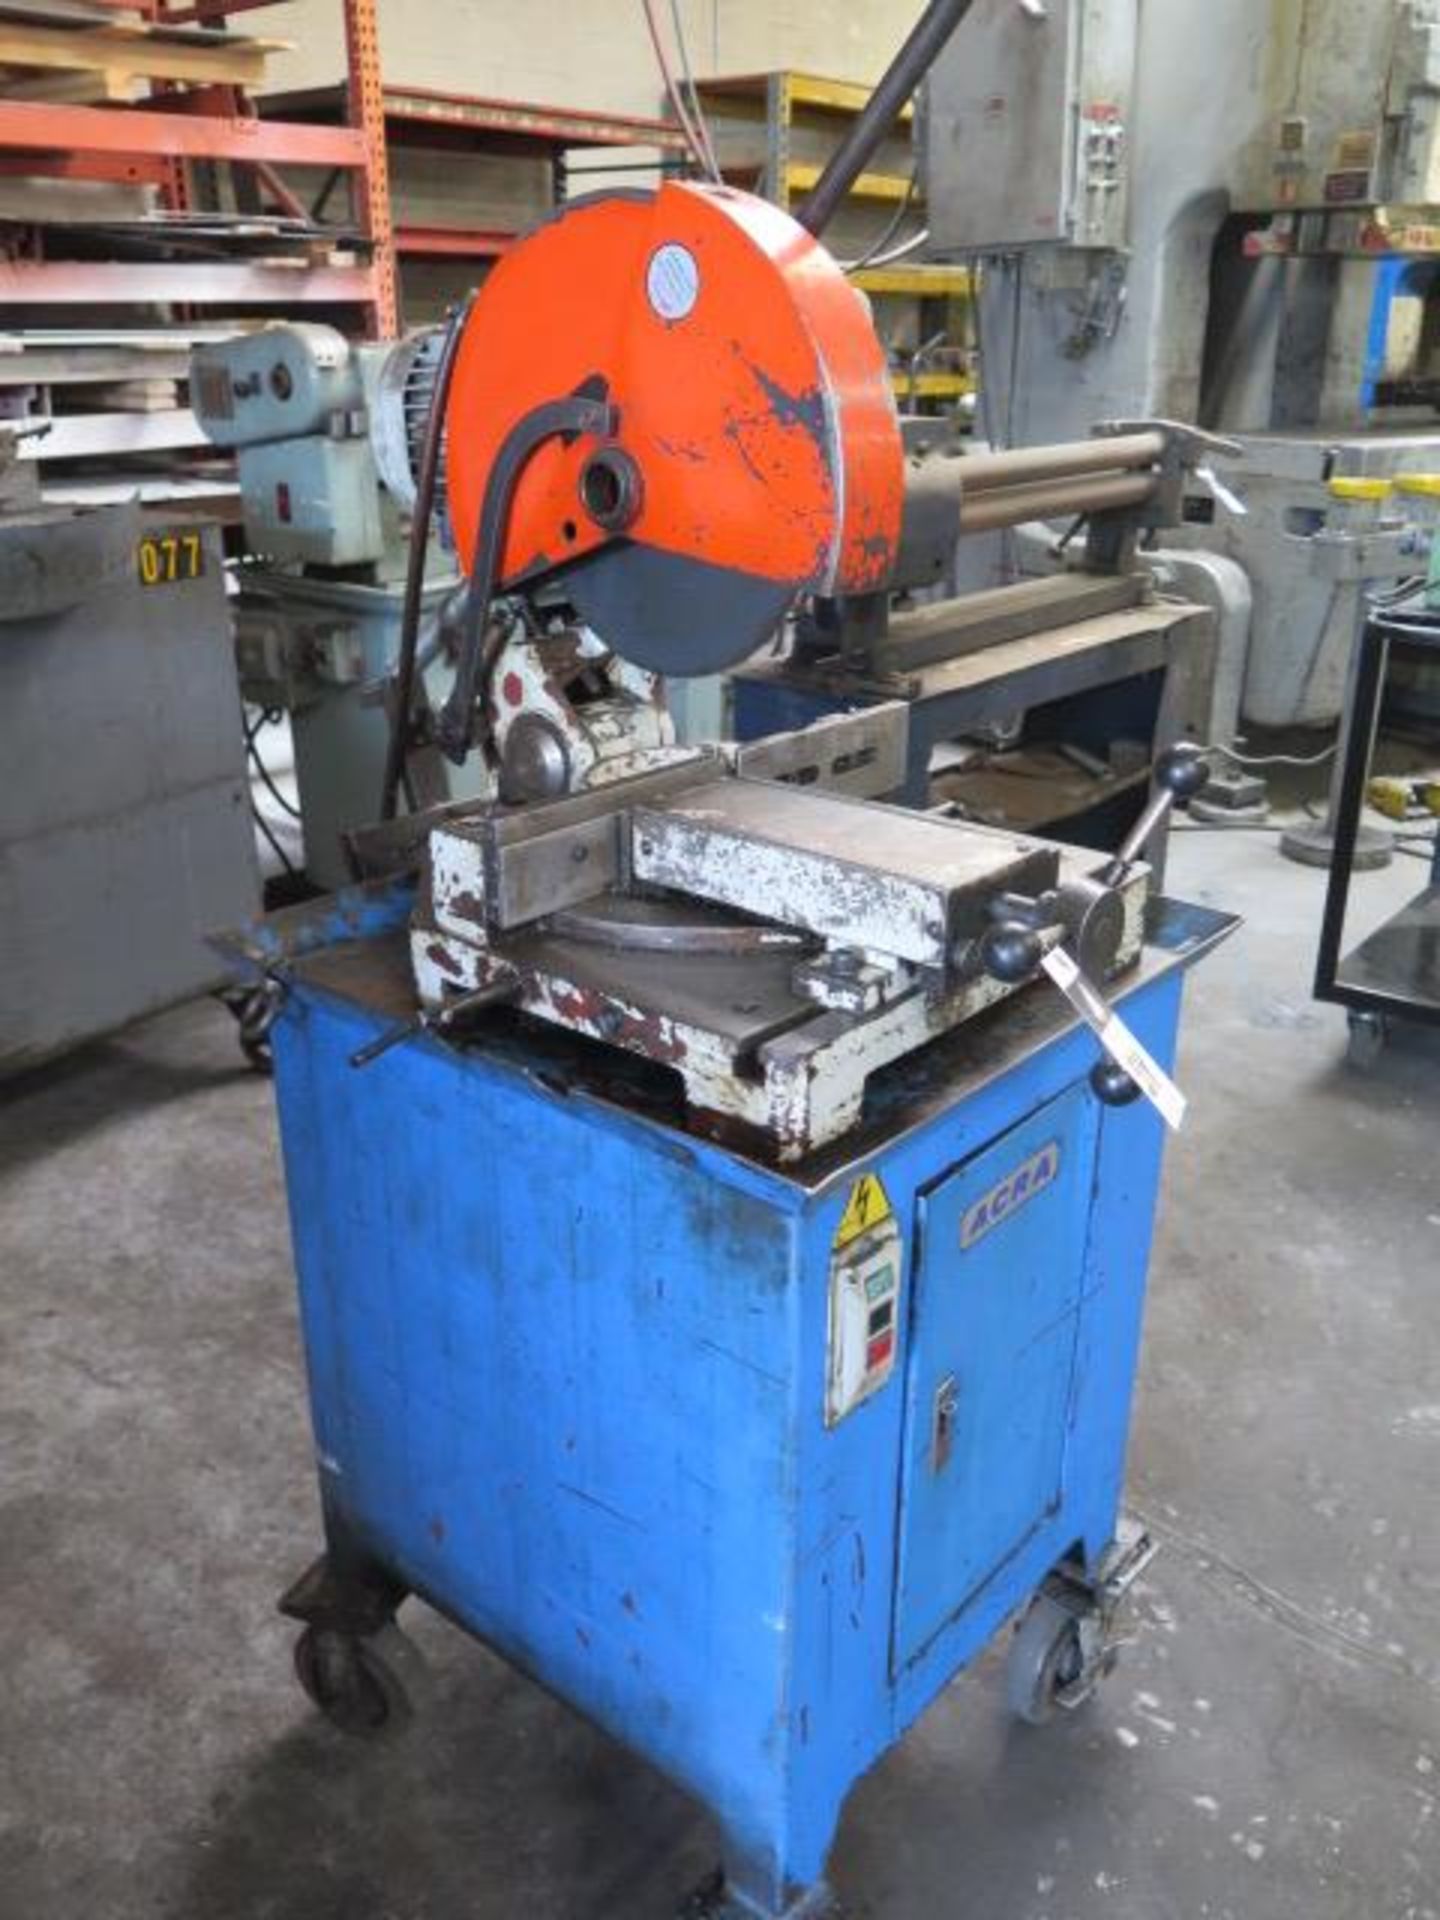 Acra FHC-370T Miter Cold Saw s/n 371647 w/ 2-Speeds, Manual Clamping (AS-IS NO WARRANTY) - Image 2 of 8